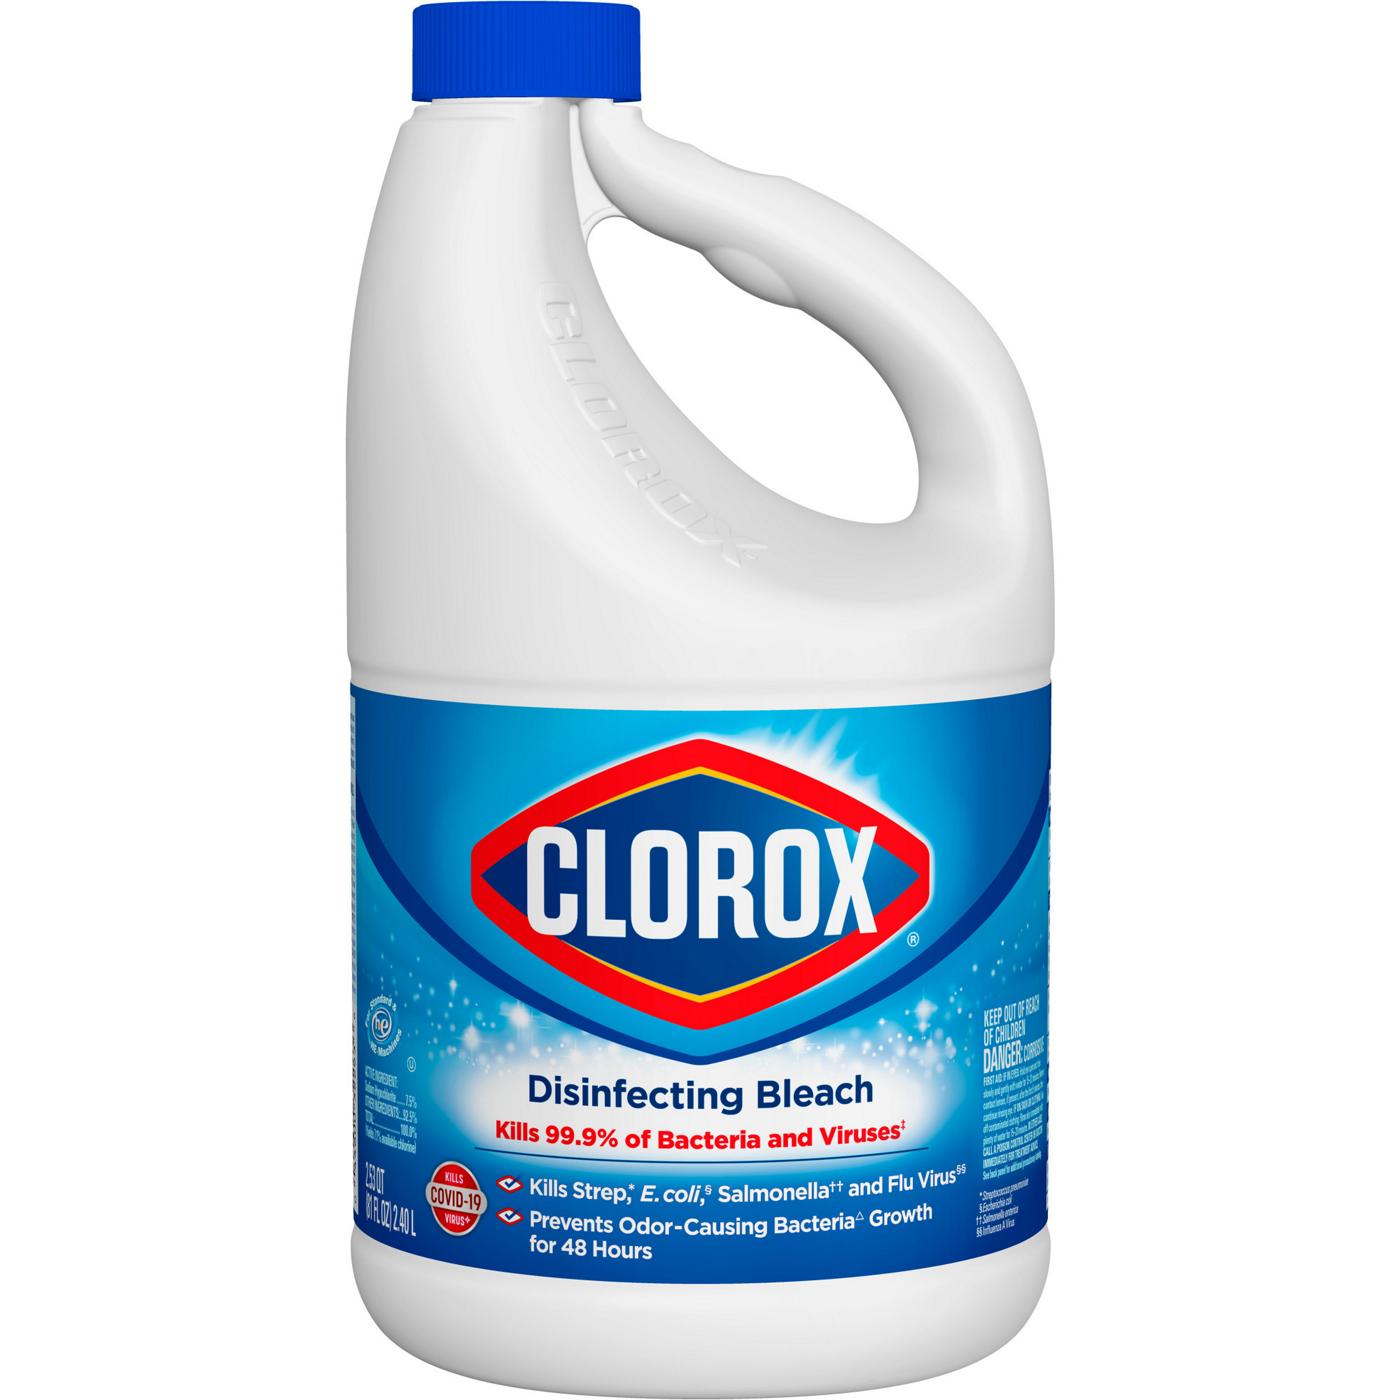 Clorox Disinfecting Bleach; image 1 of 8